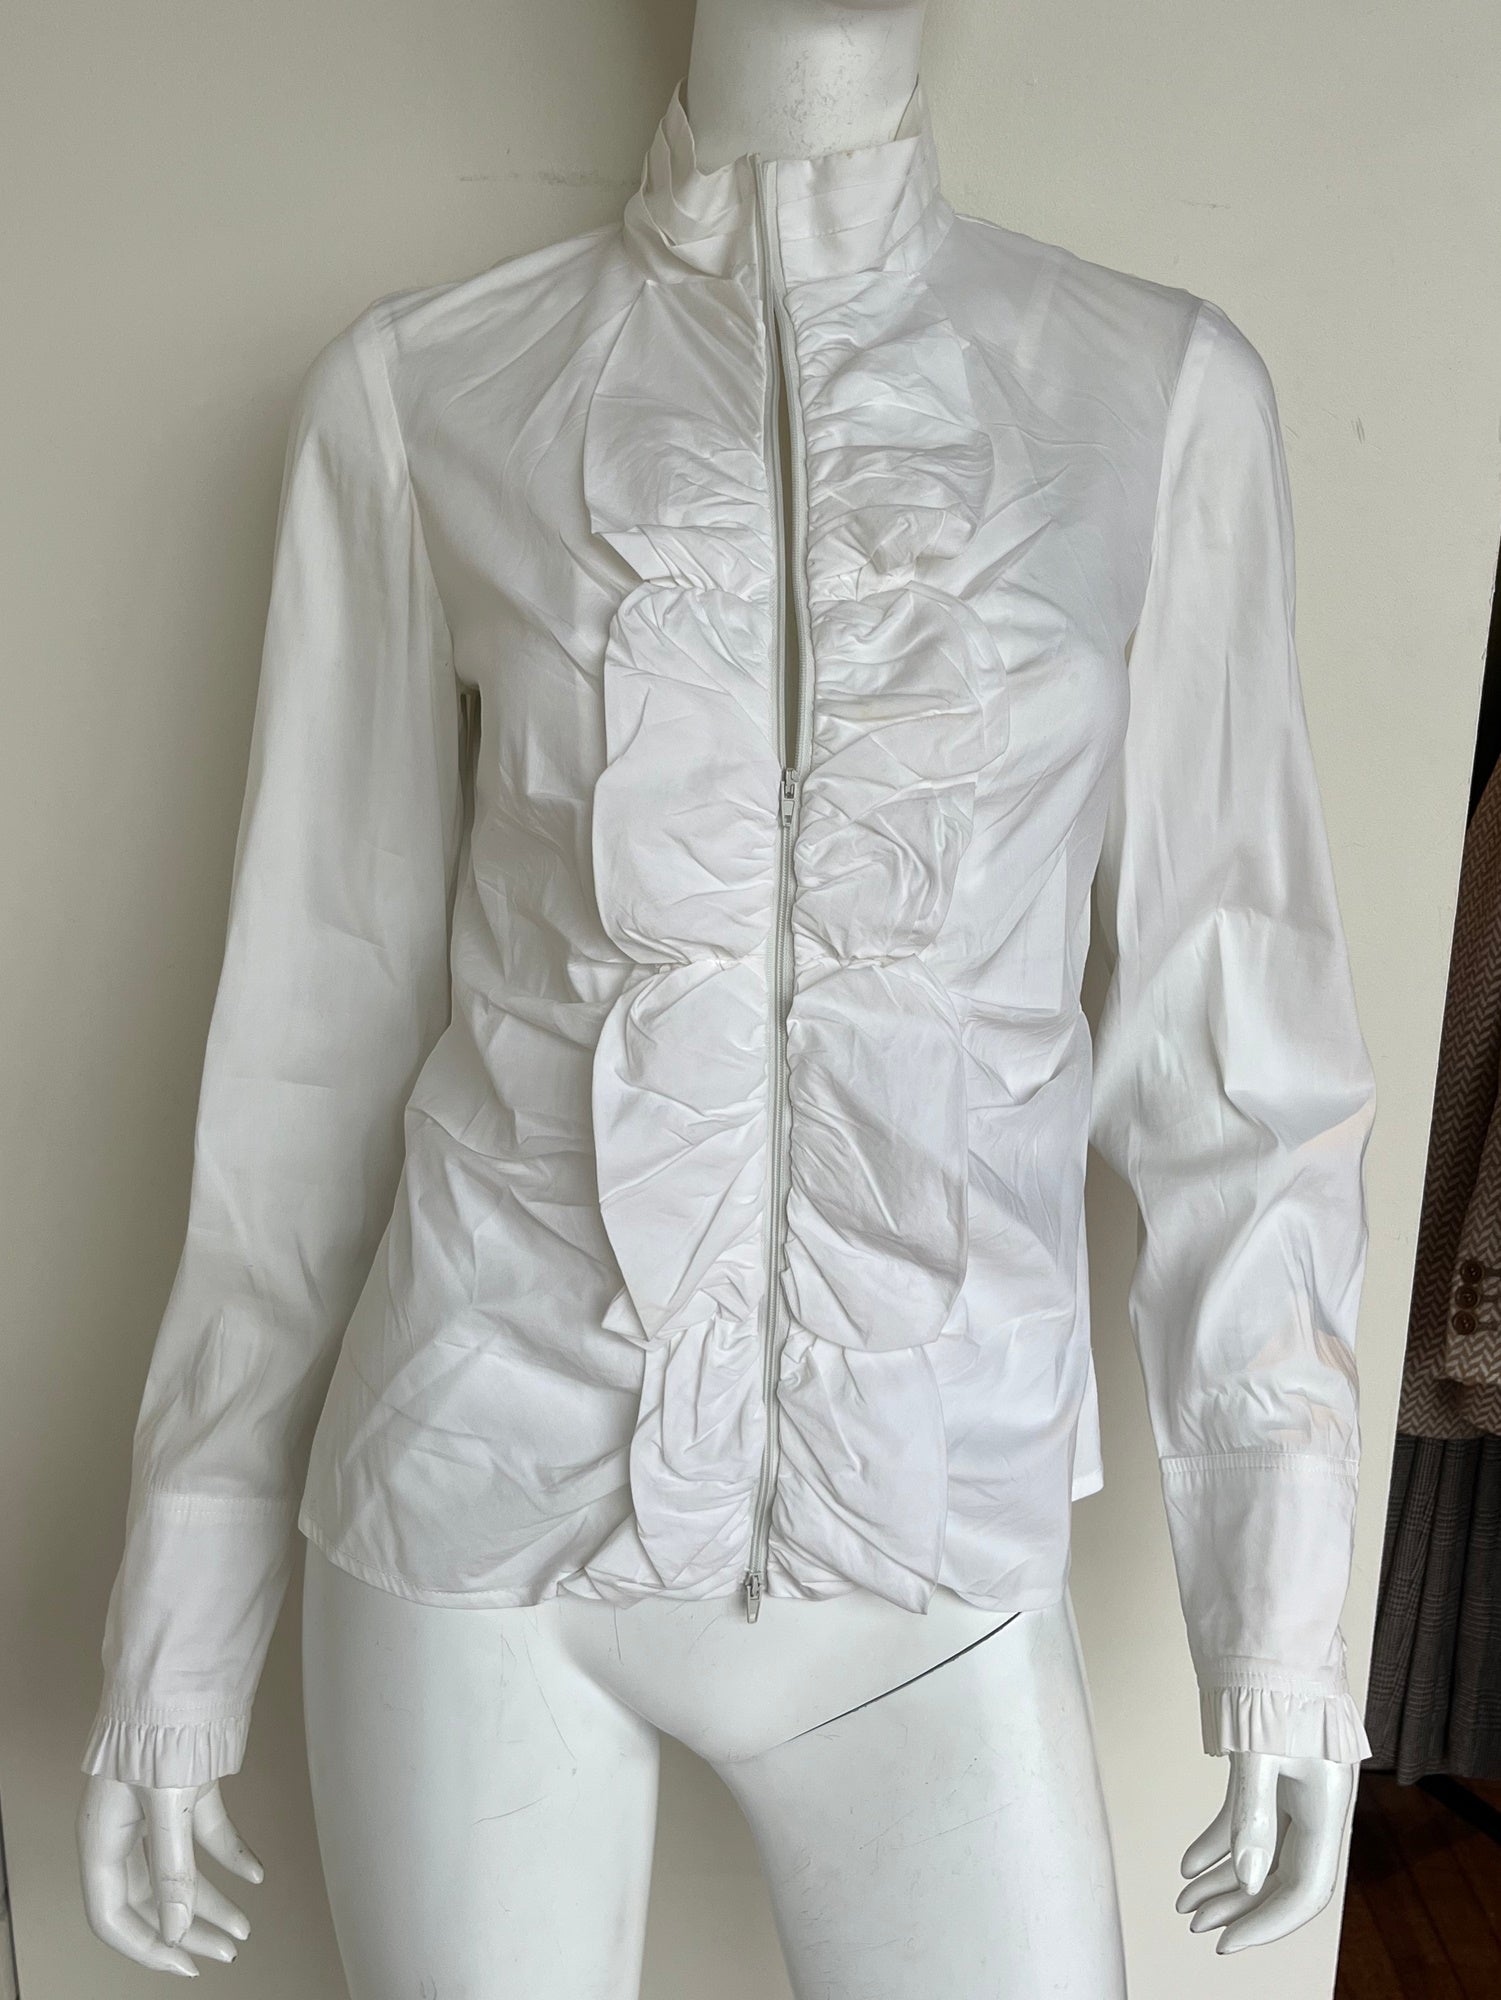 Ruffle Front Zip Up Blouse Size 8